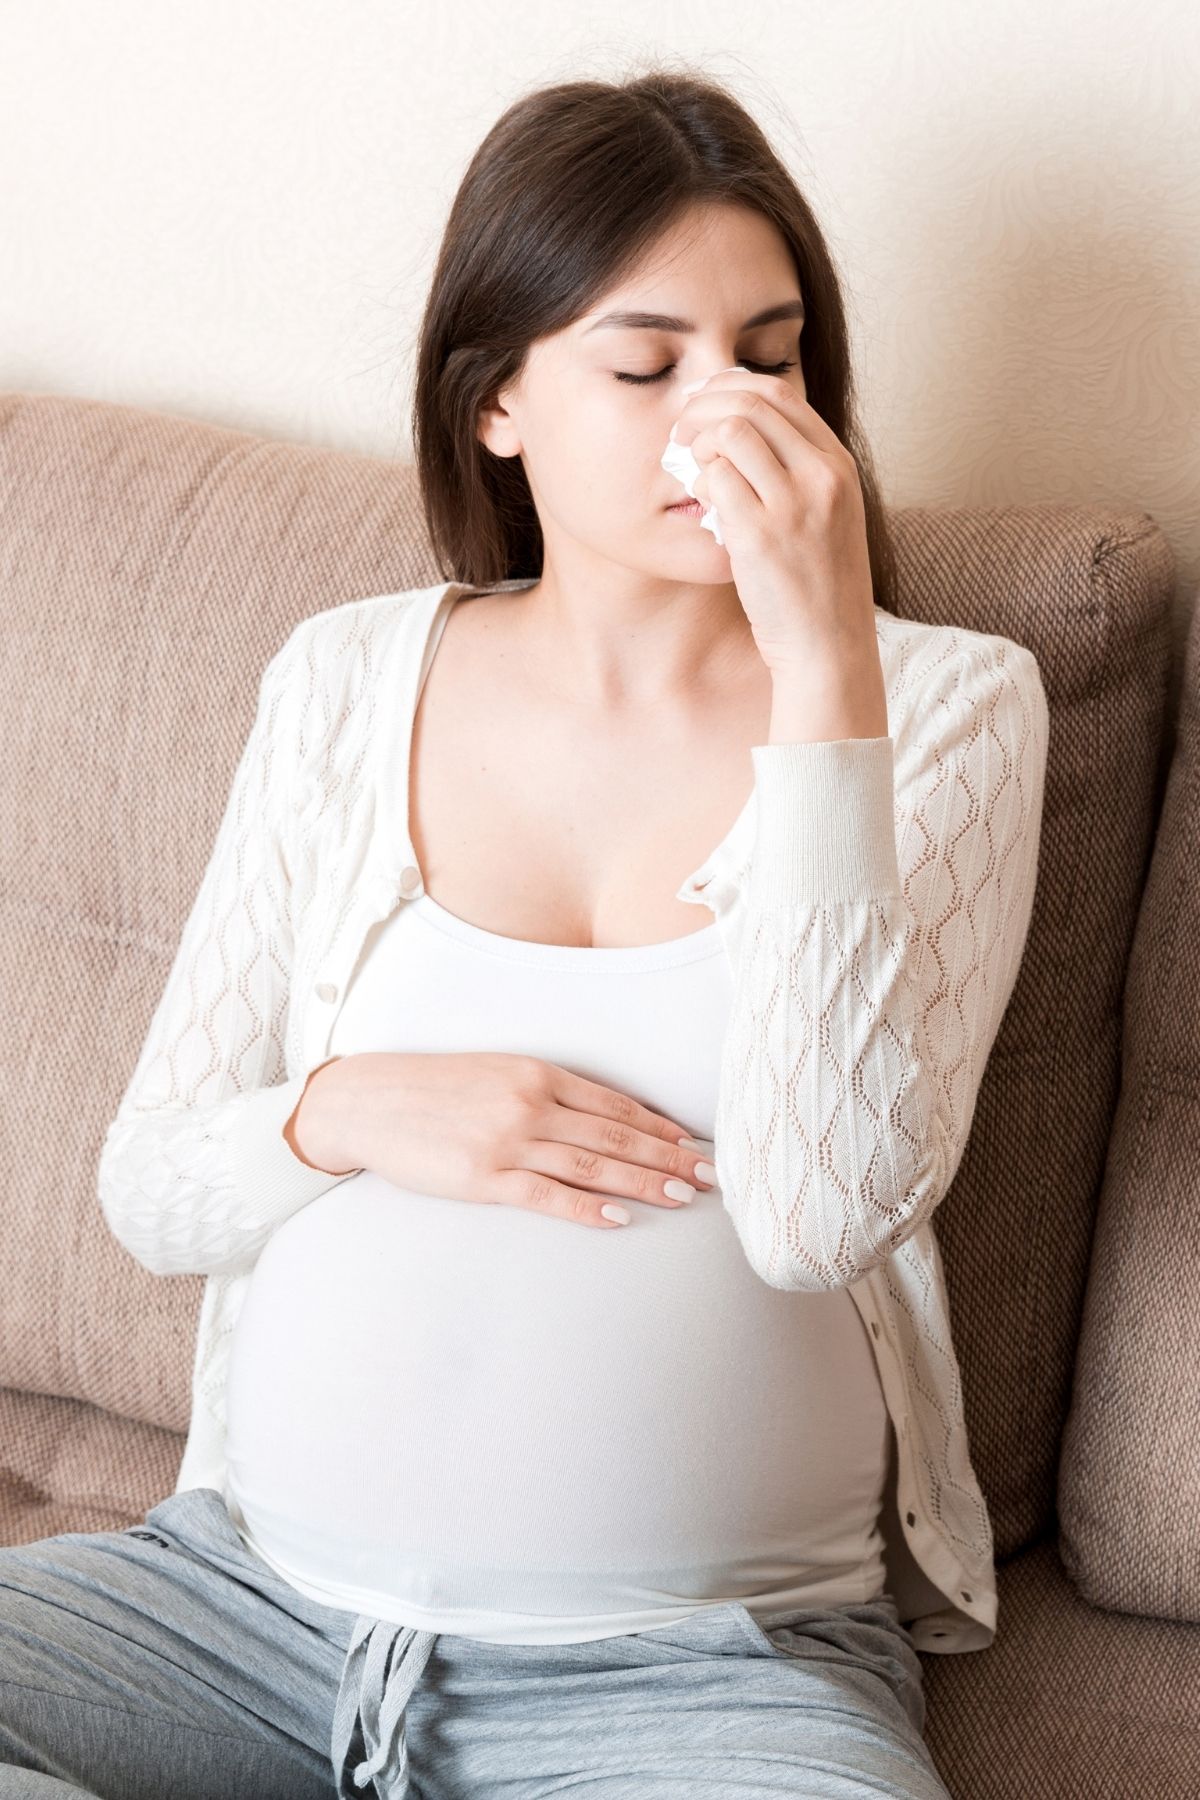 Sick pregnant woman rests hand on belly and blows her nose while sitting on couch.